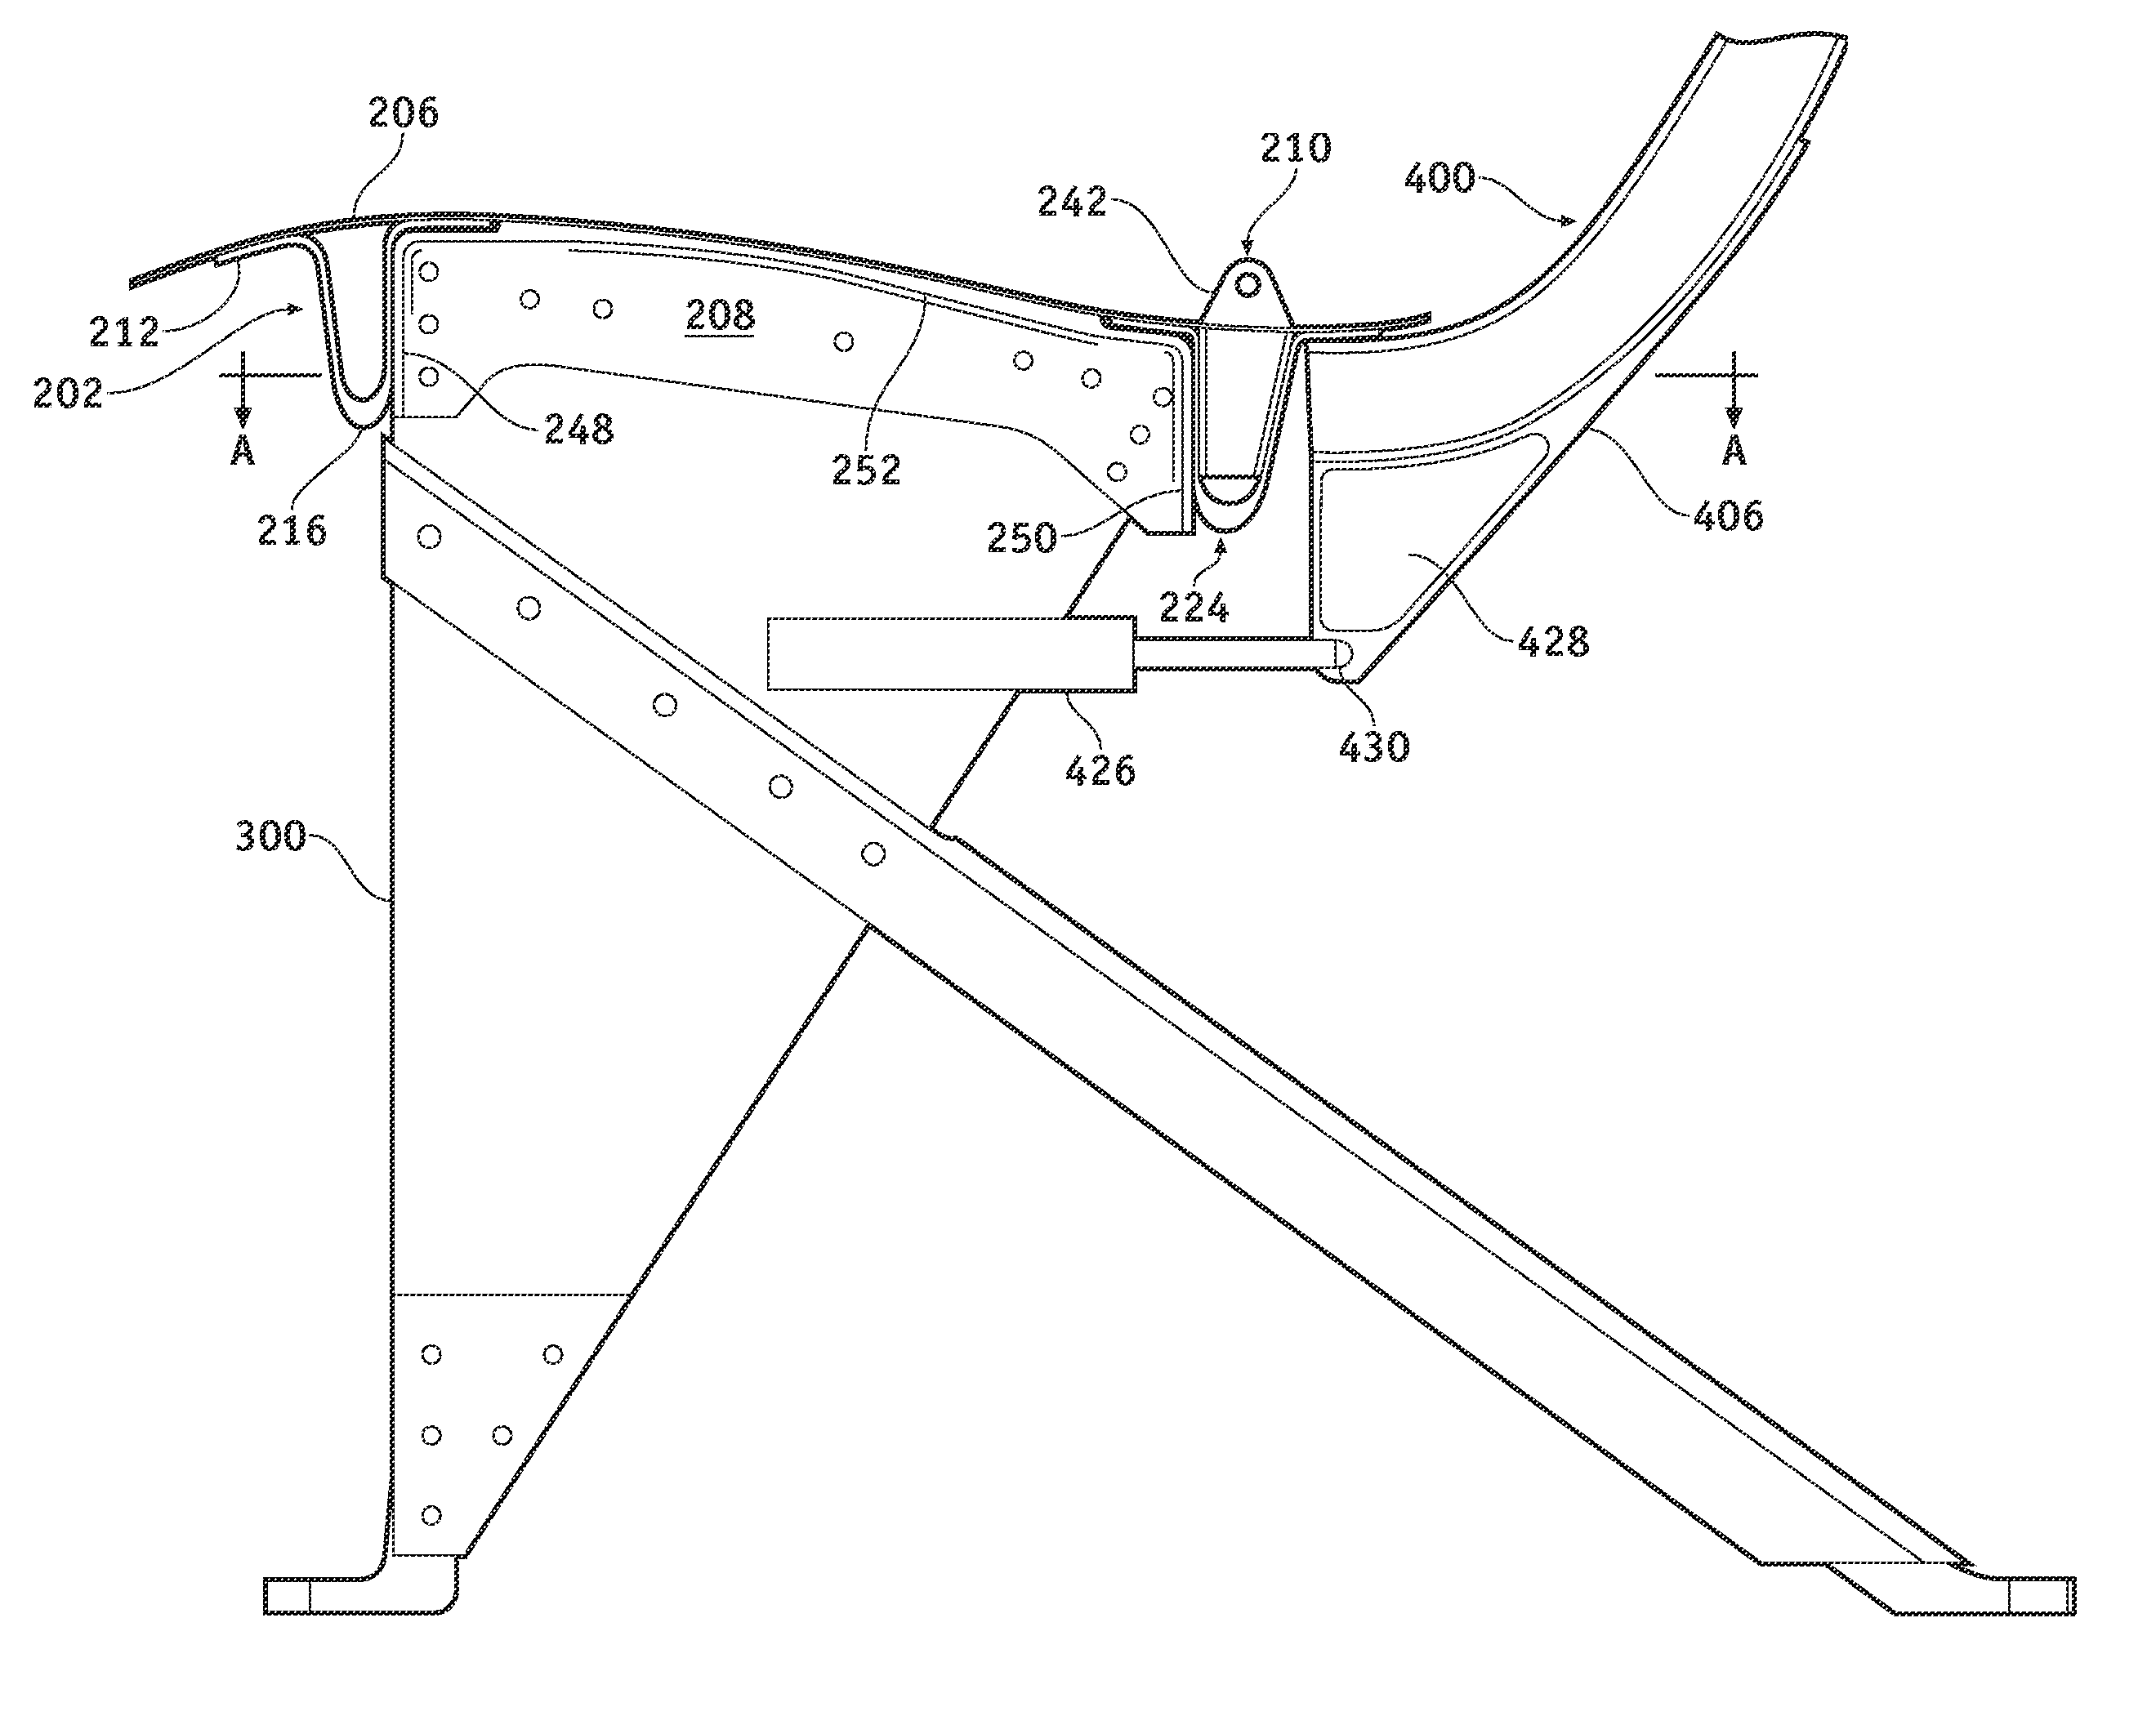 Composite seat back structure for a lightweight aircraft seat assembly